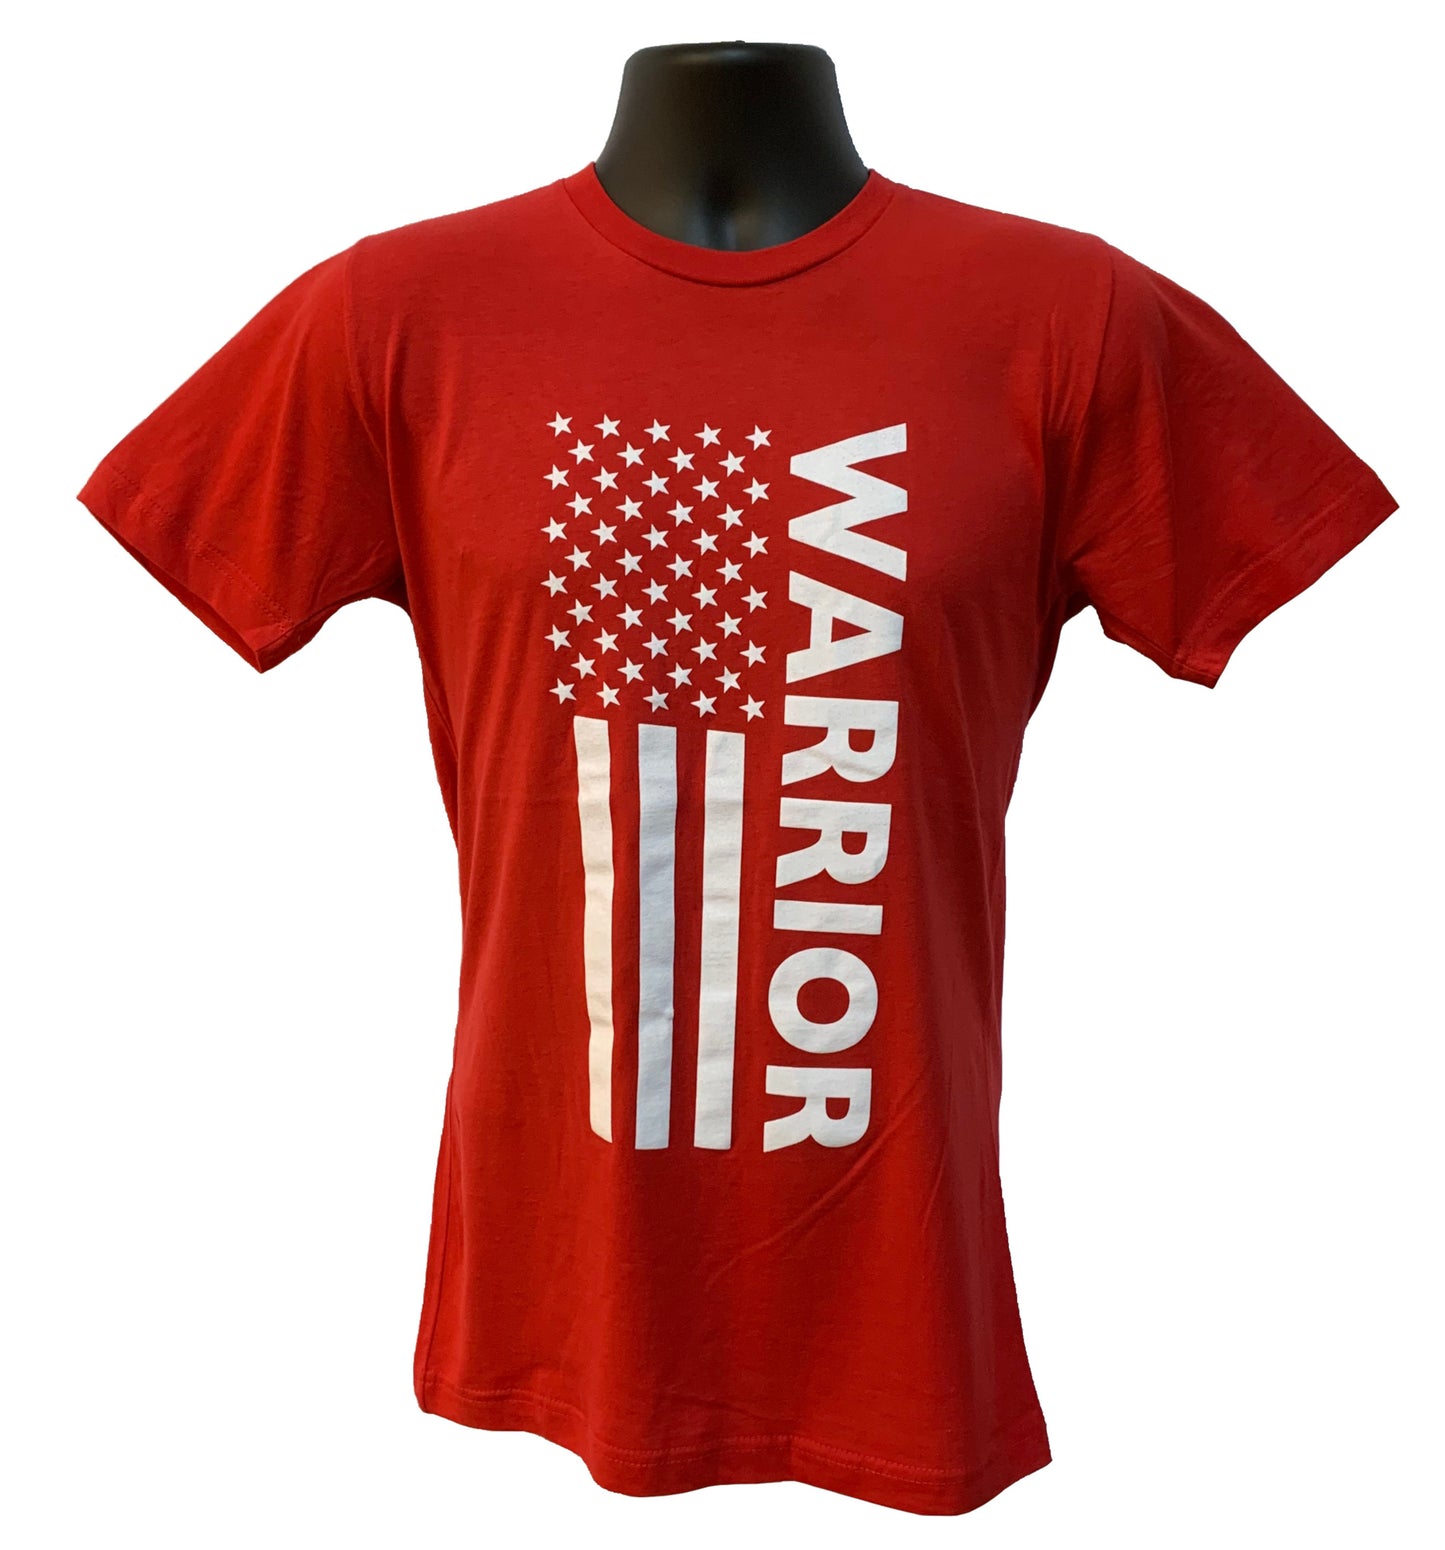 Grunt Force "WARRIOR" American Flag 100% Cotton T-Shirt - 7 Colors